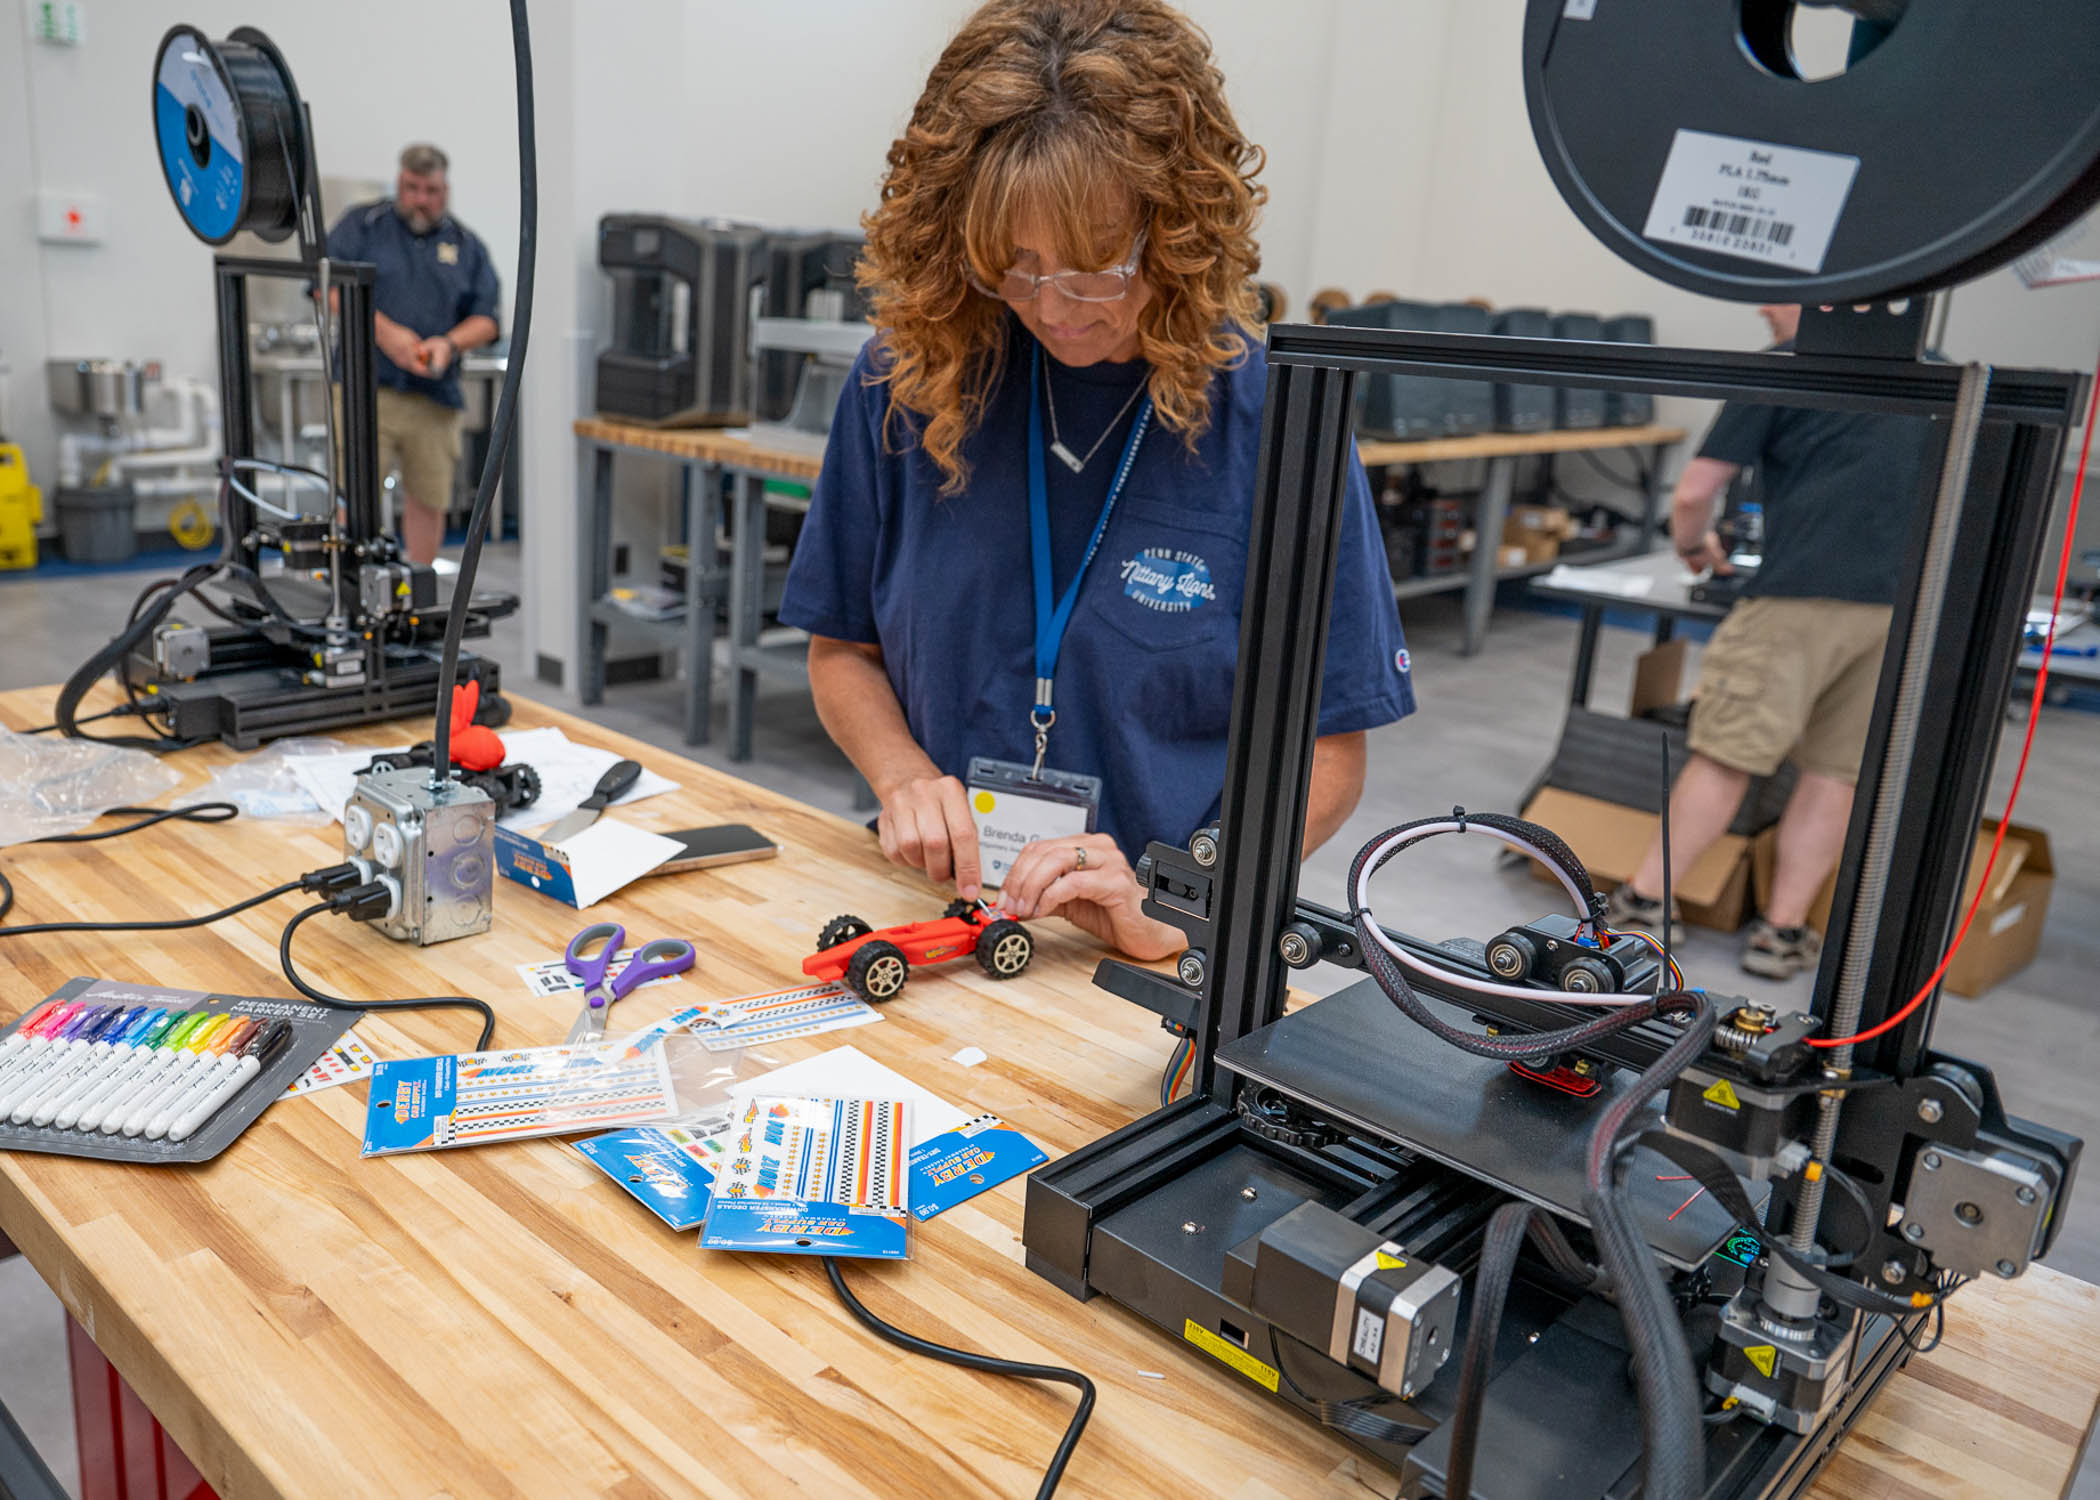 Teachers become students of STEM at Penn College